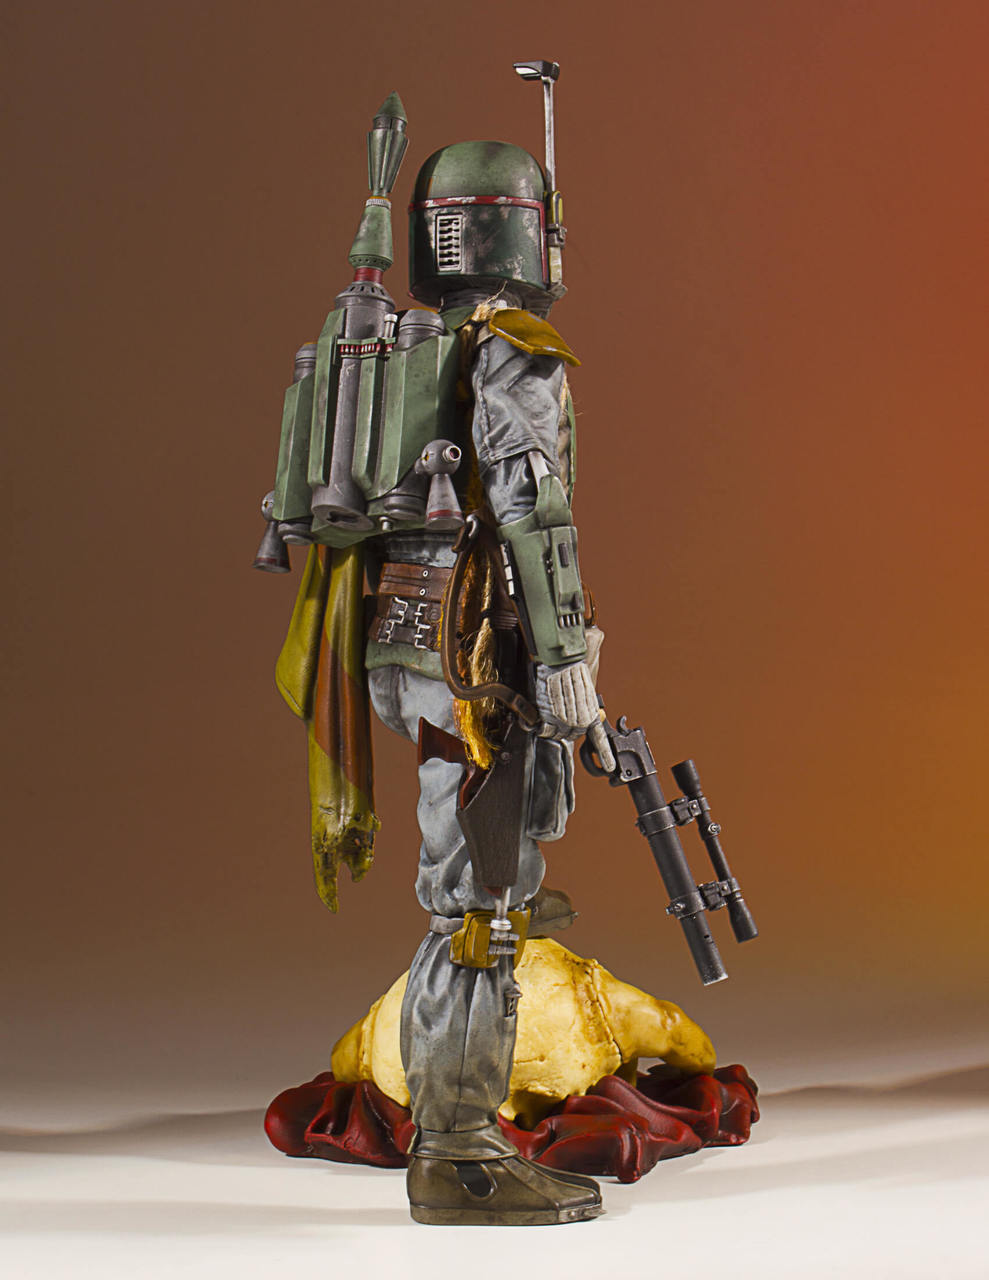 Star Wars - Boba Fett Collector’s Statue 1/8 (Gentle Giant) CkU2SS0m_o